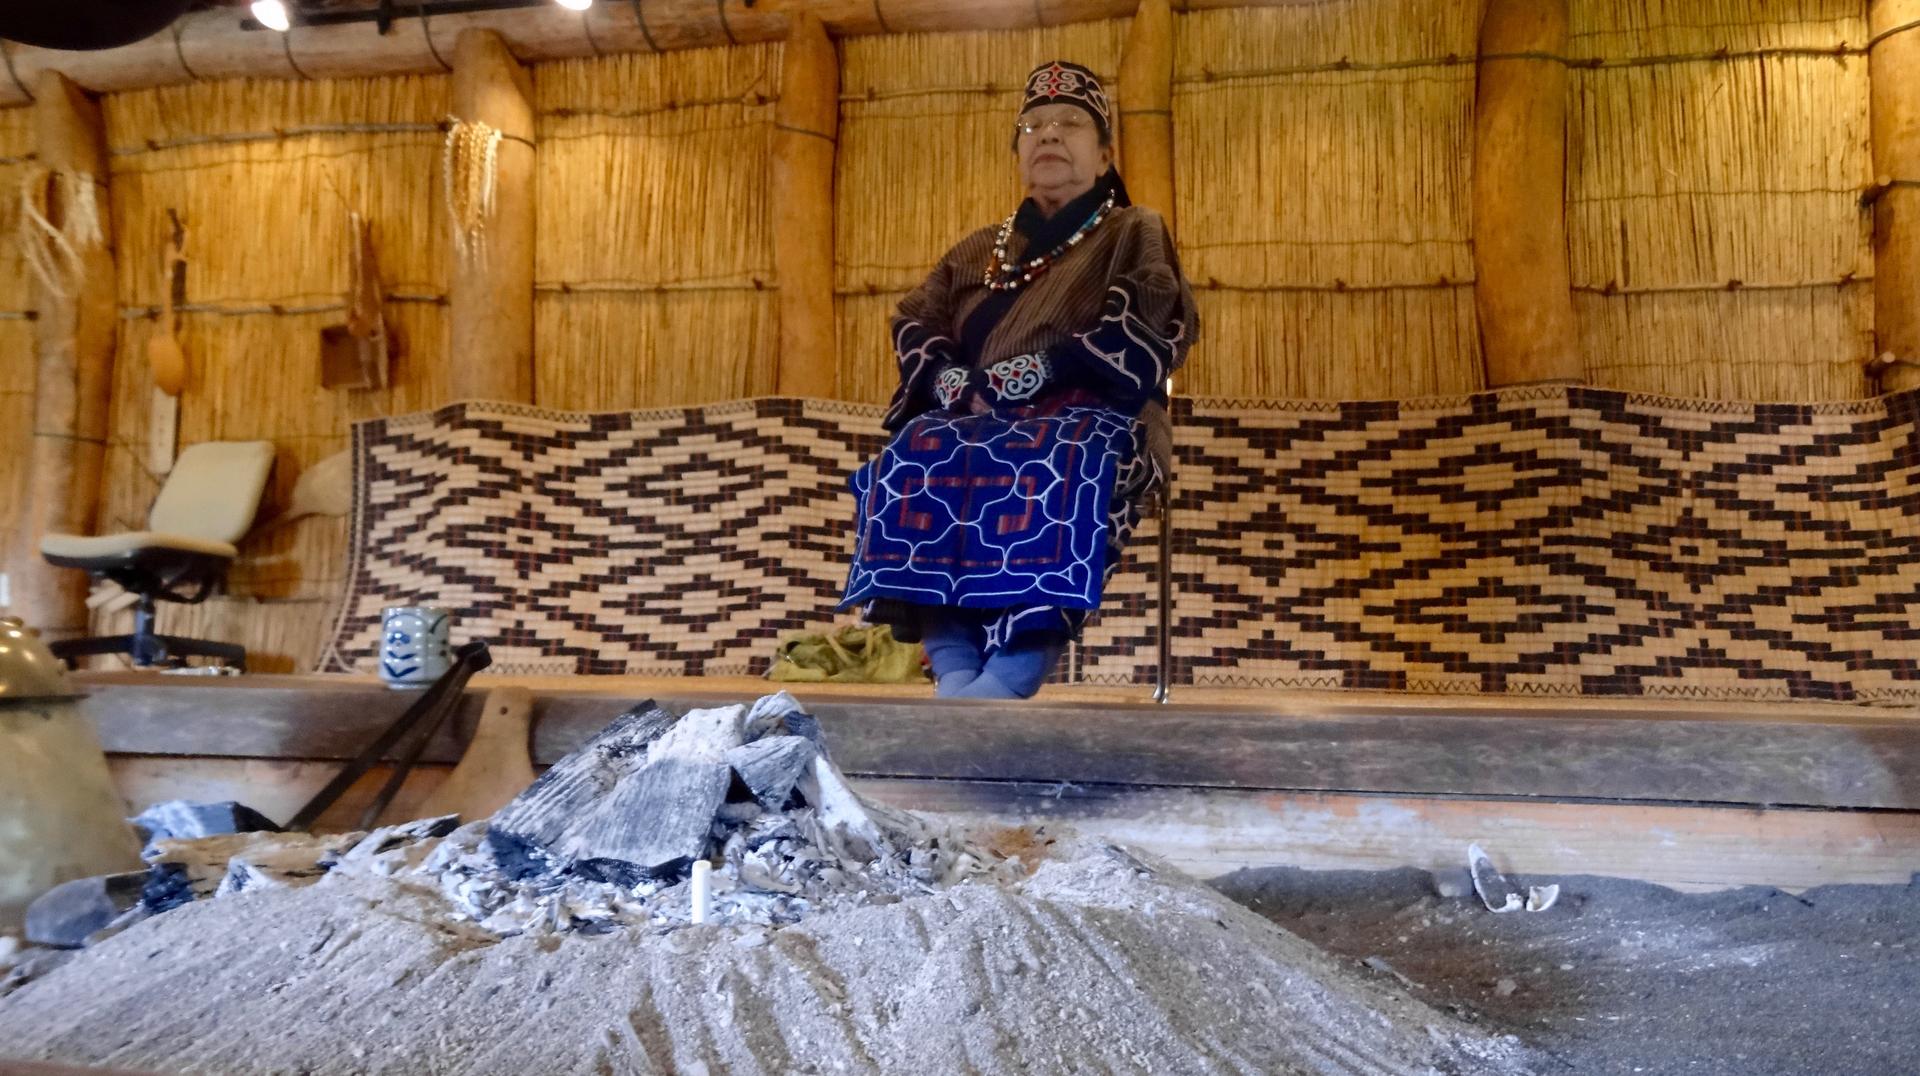 Kibata Sachiko recites an Ainu epic poem taught to her by her grandmother. She is in reconstructed Ainu dwelling in Nibutani, Japan.